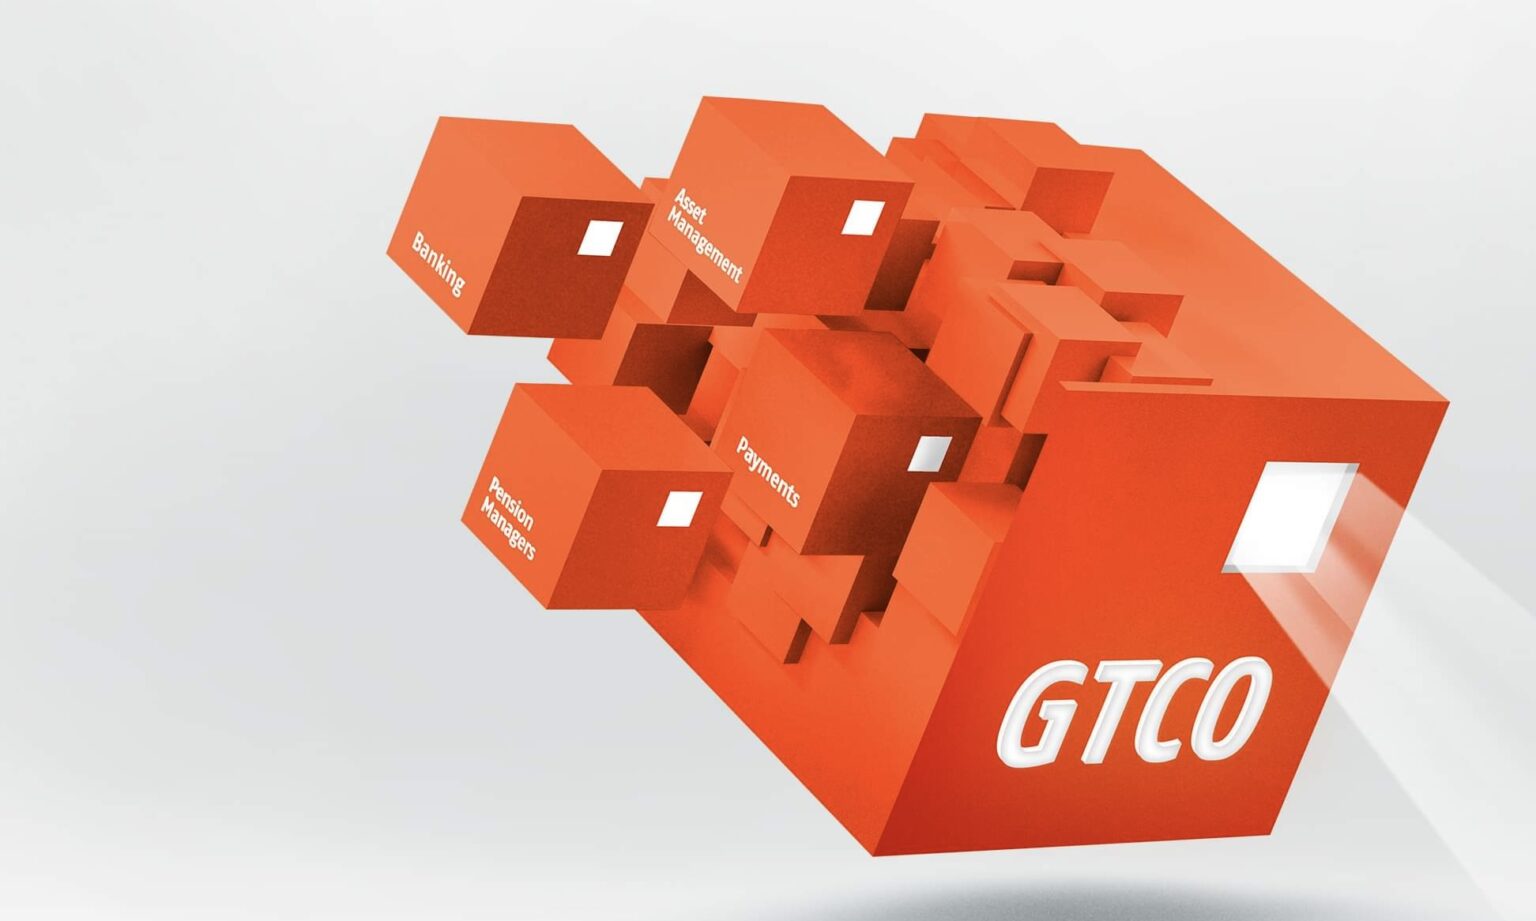 Can GTCO take on Nigerian fintechs?